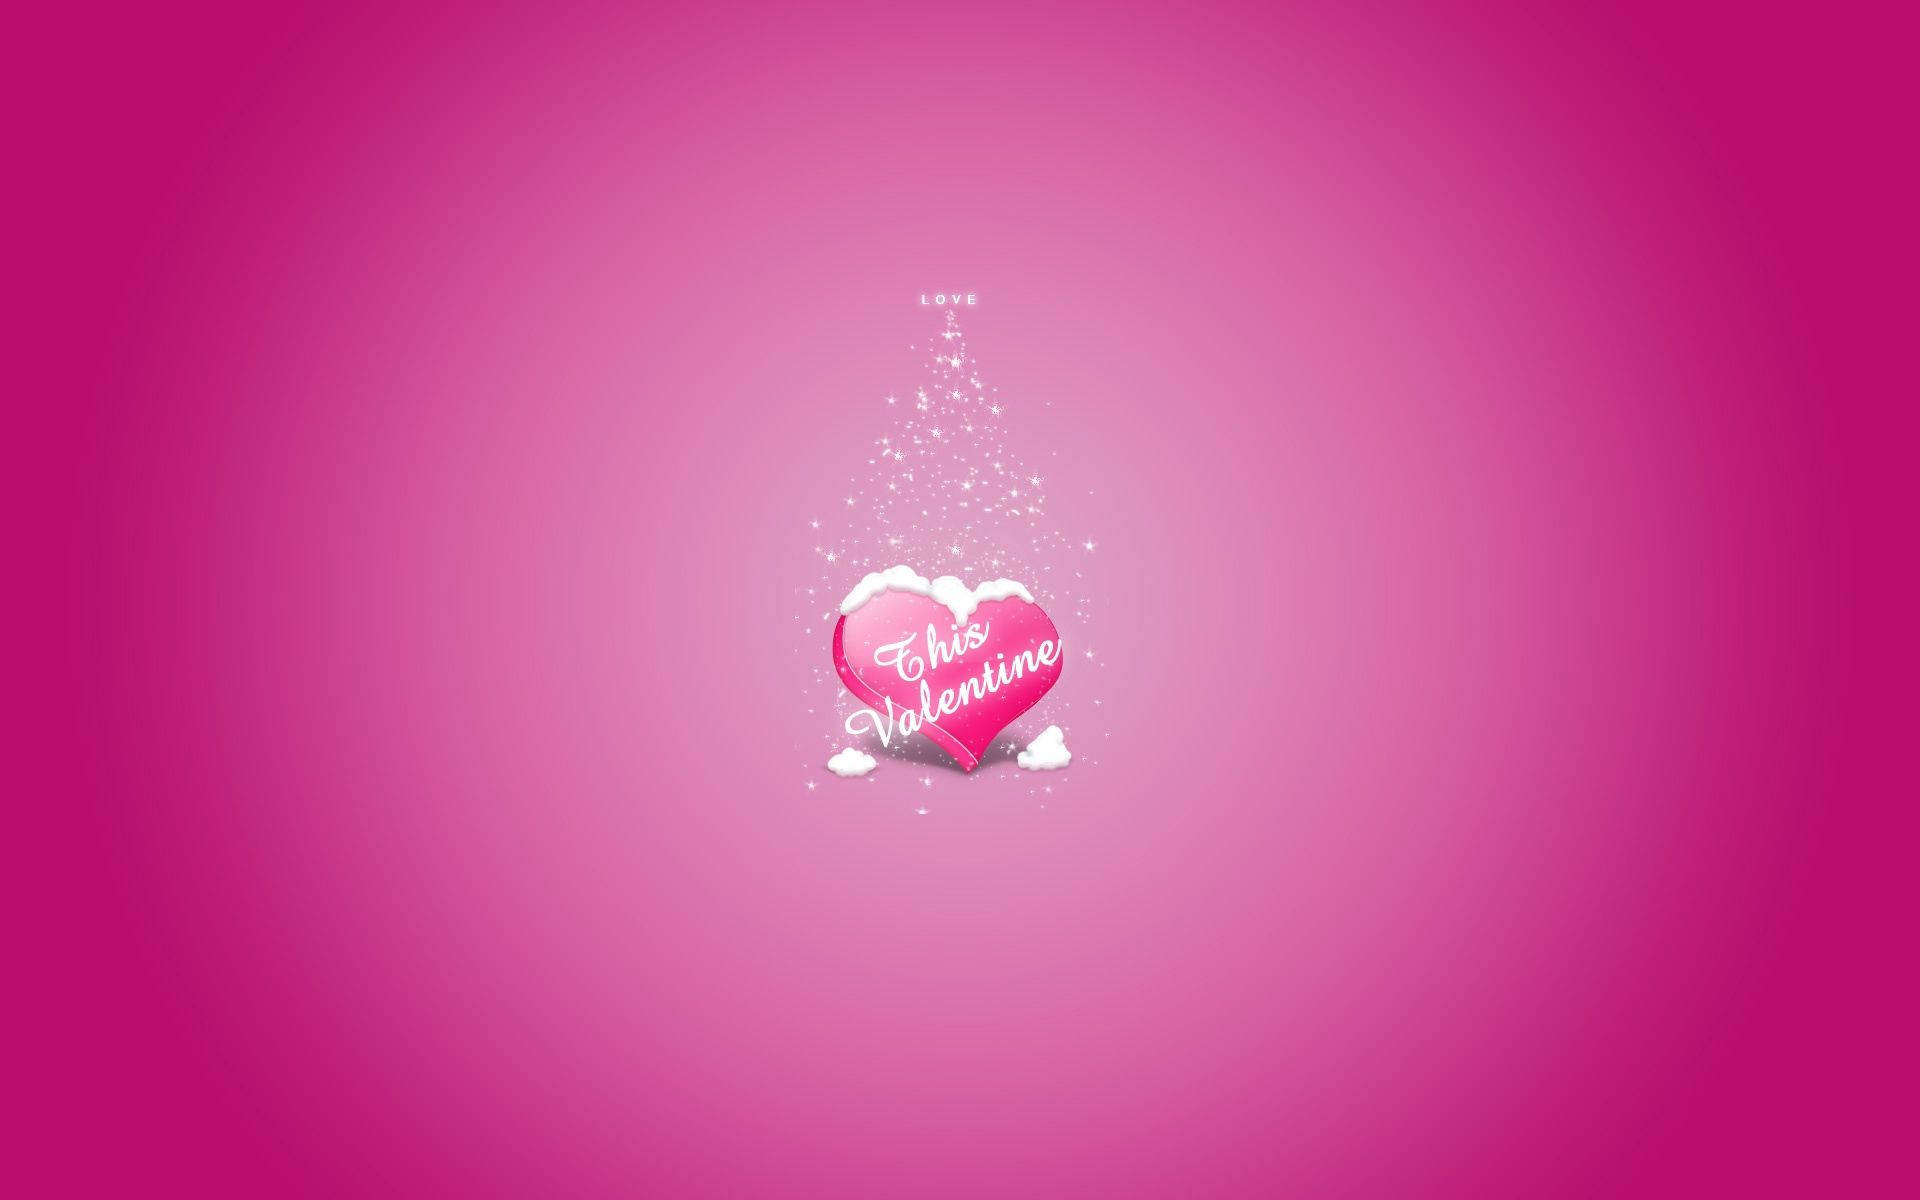 Download Hearts wallpapers for mobile phone, free Hearts HD pictures